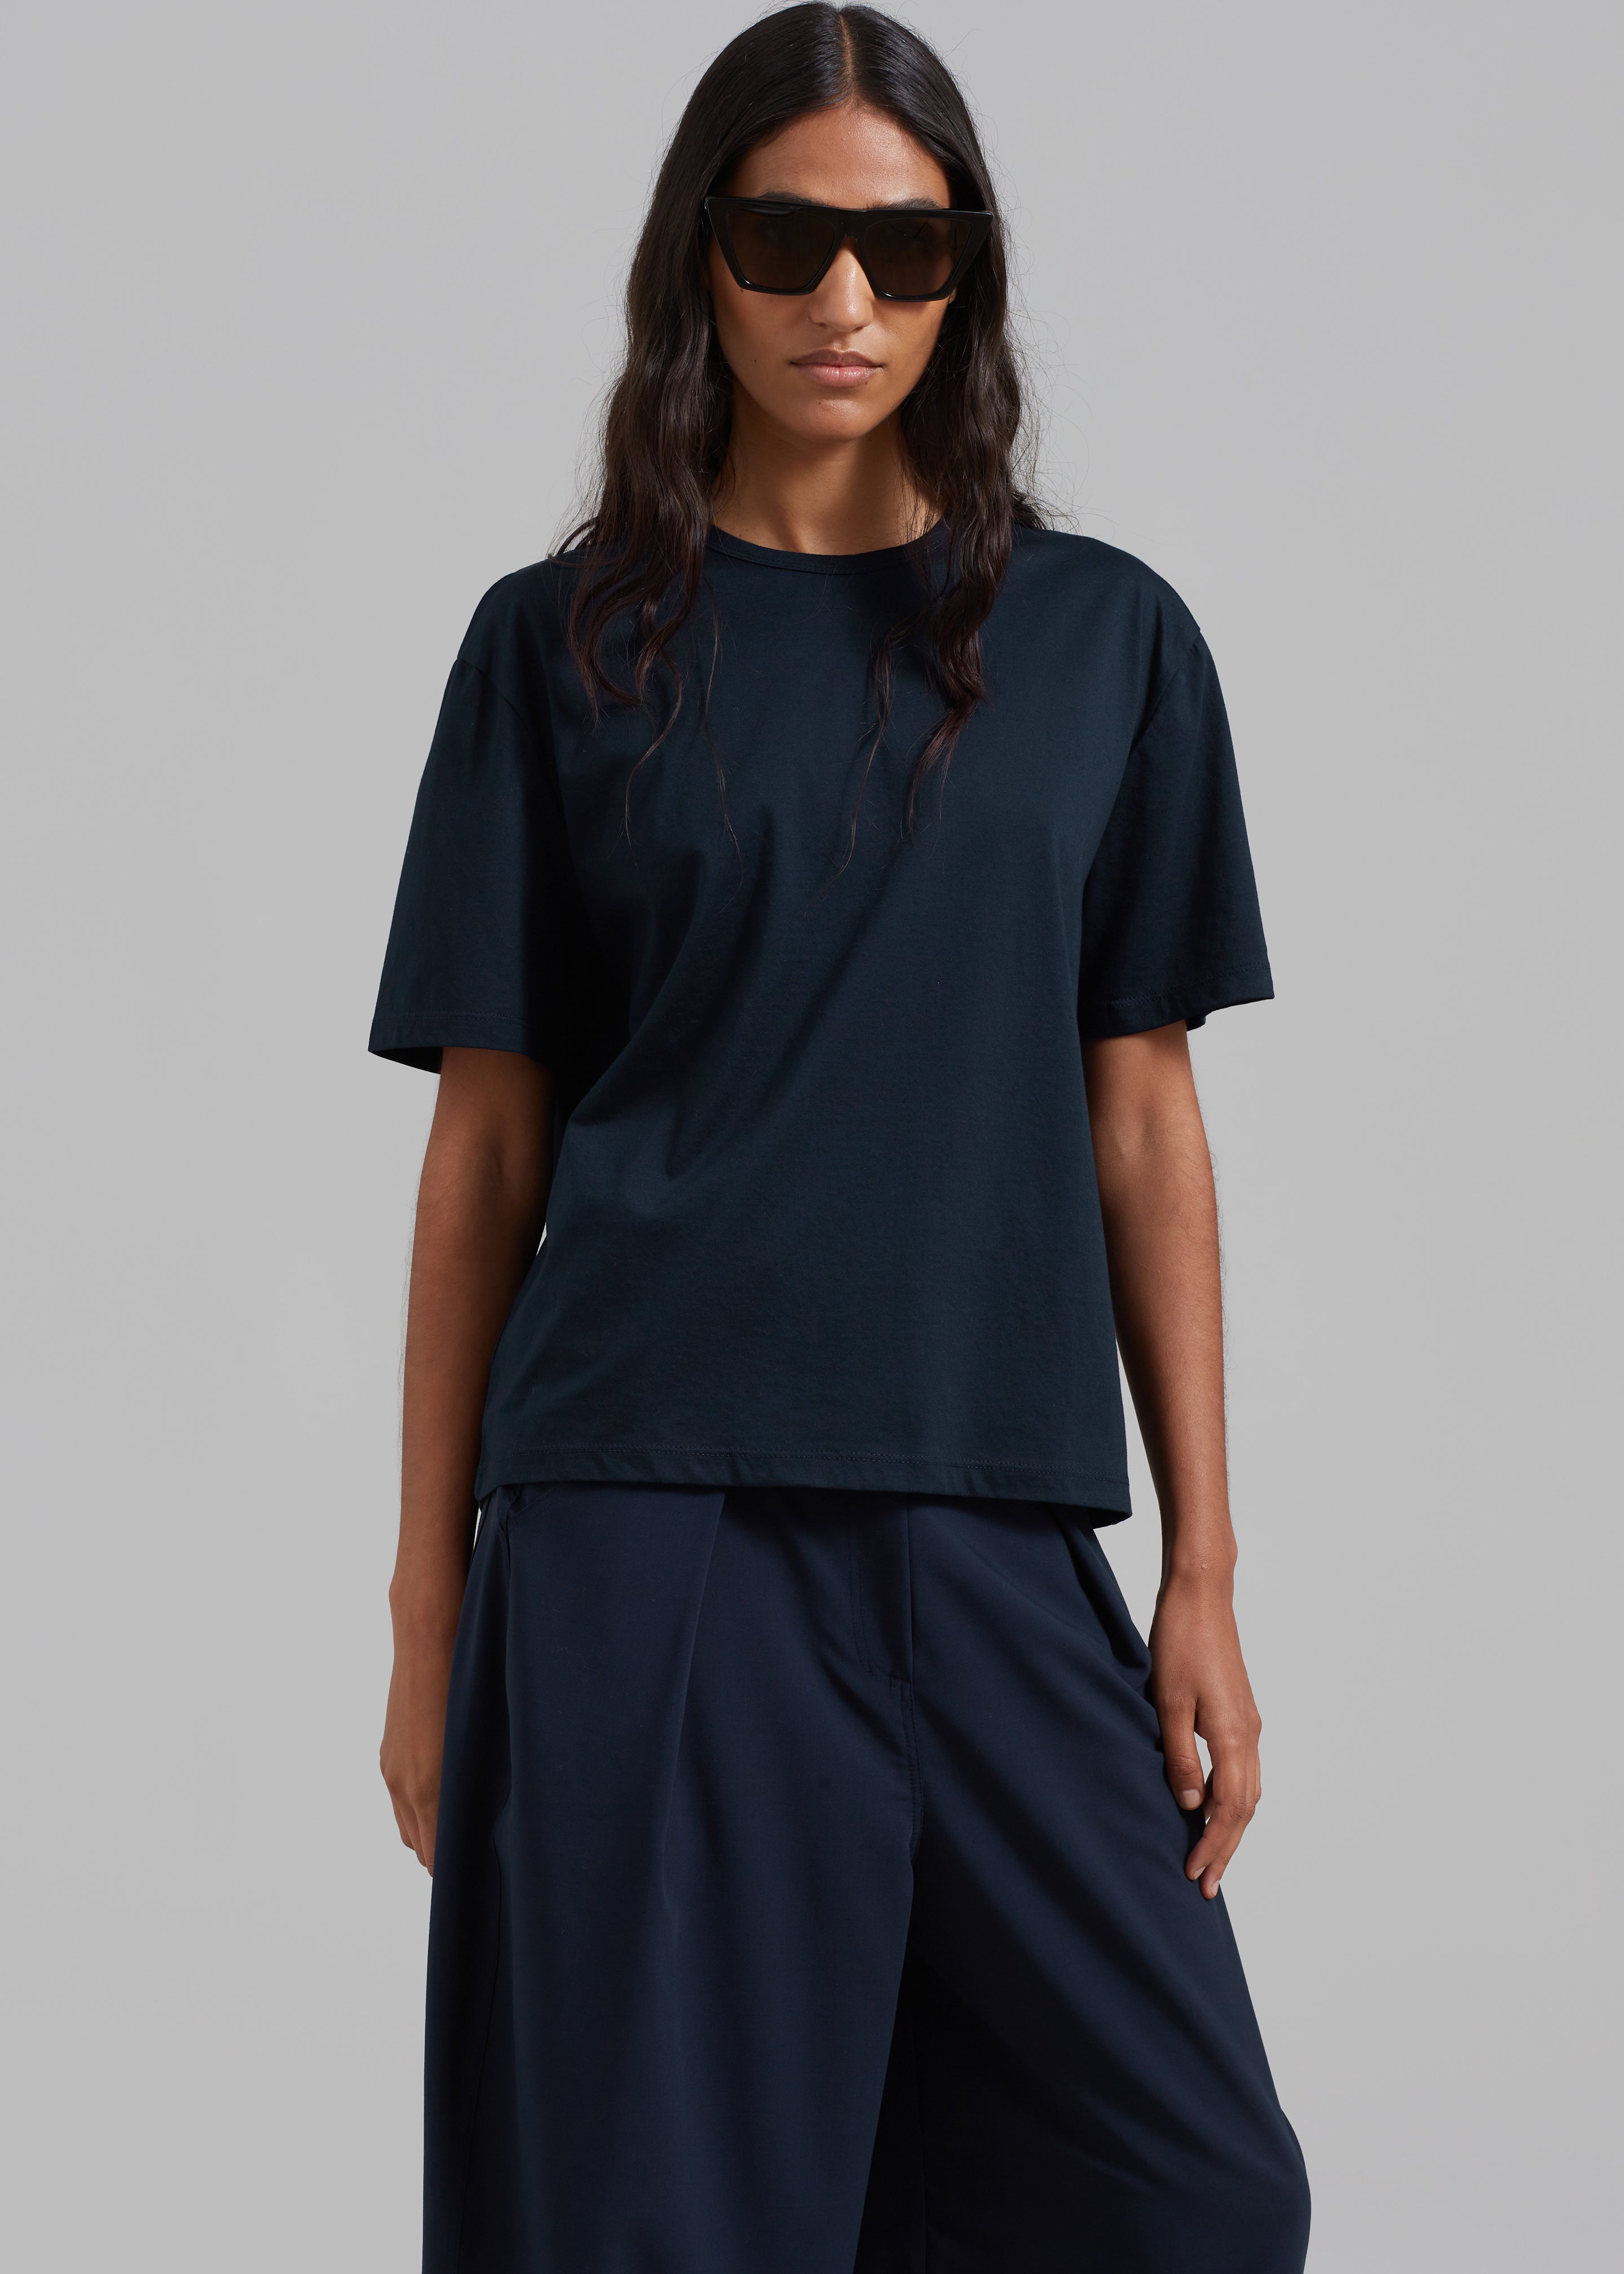 Connell Boxy Tee - Navy - 2